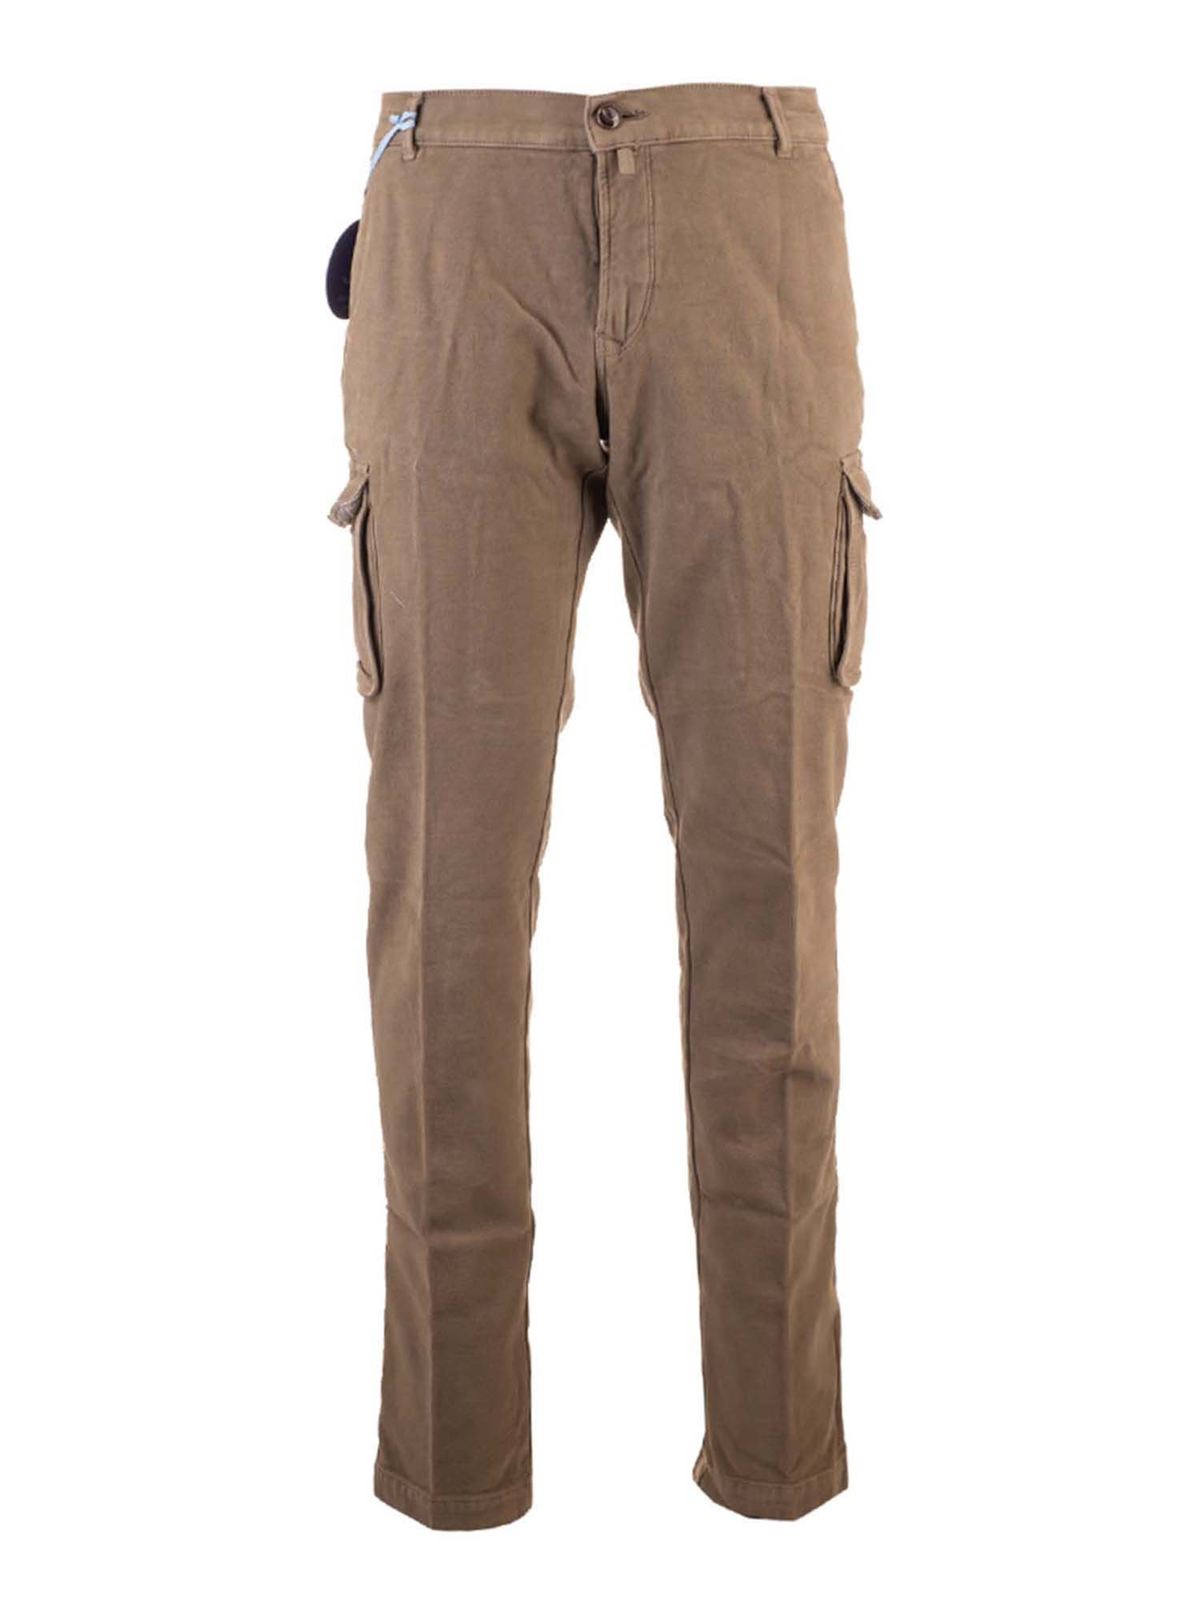 JACOB COHEN POCKETS PANTS IN LIGHT BROWN